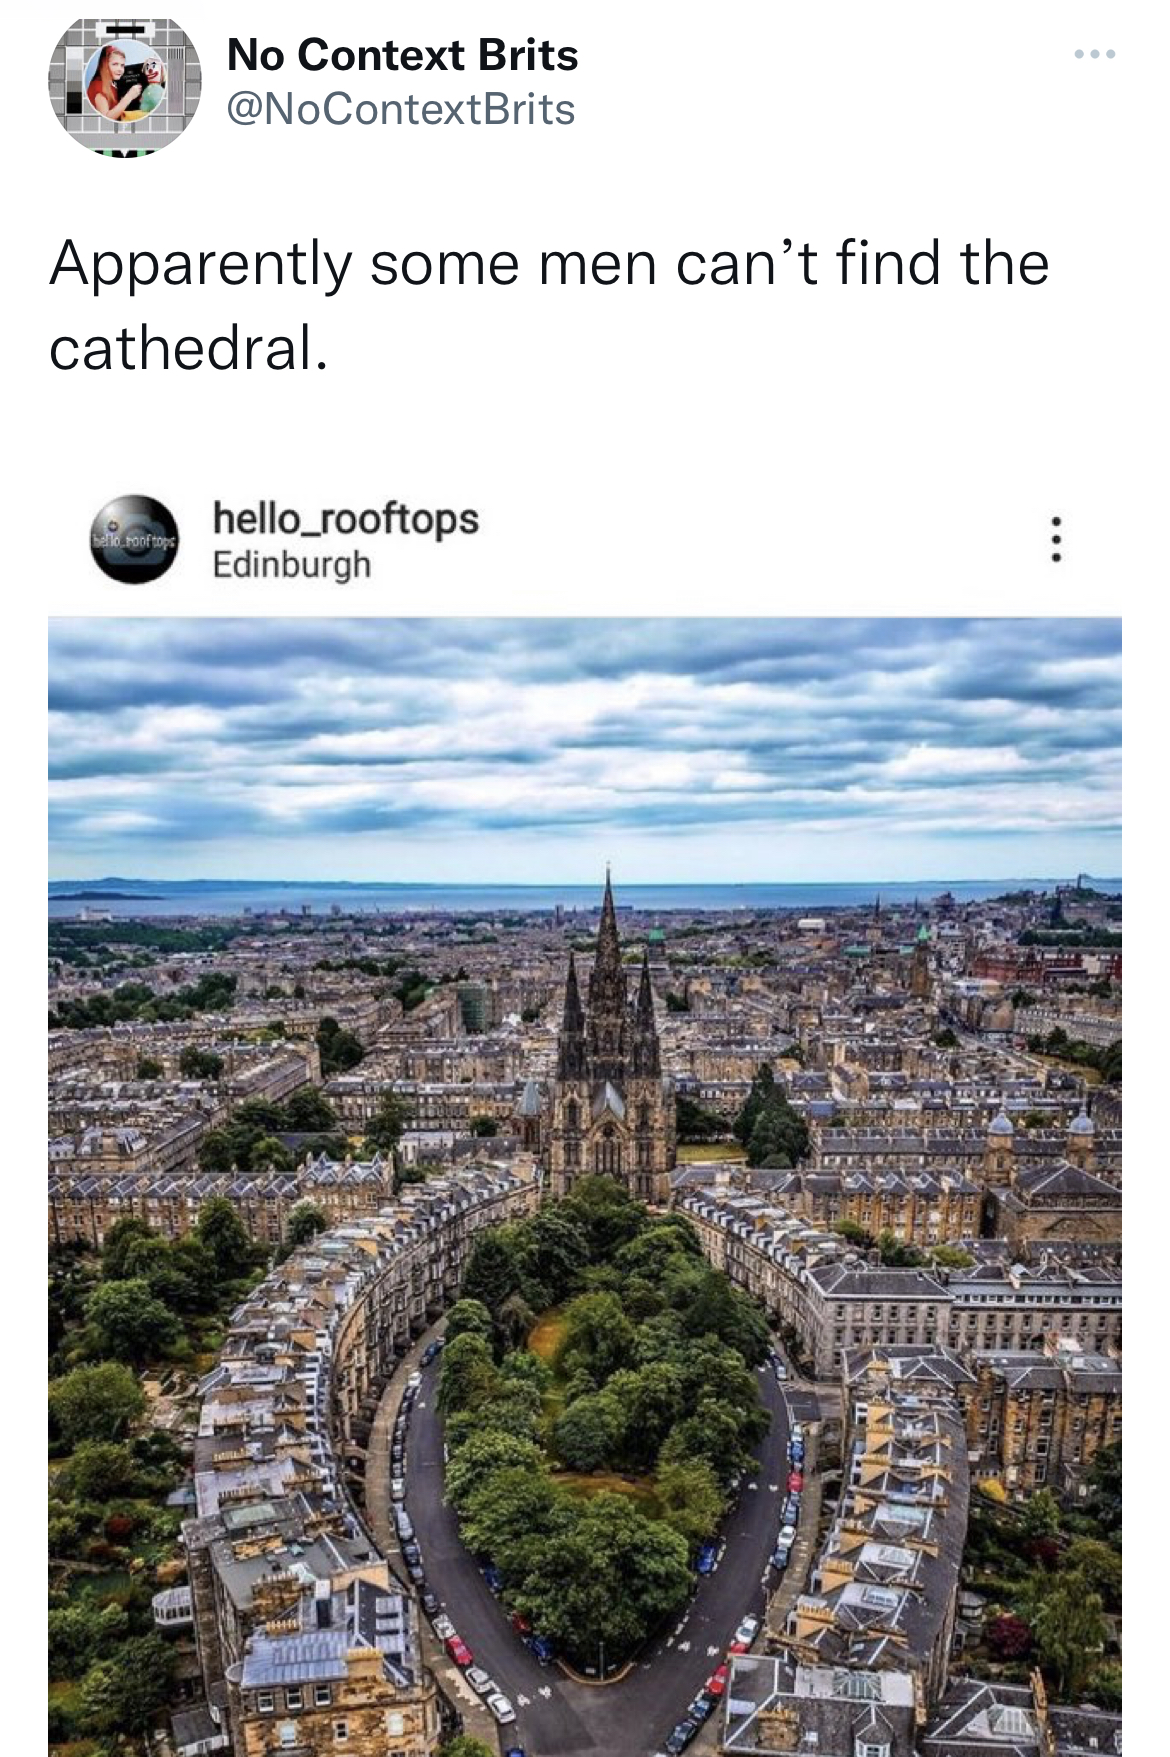 Savage and hilarious tweets - men cant find the cathedral - No Context Brits Apparently some men can't find the cathedral. hello_rooftops Edinburgh ww